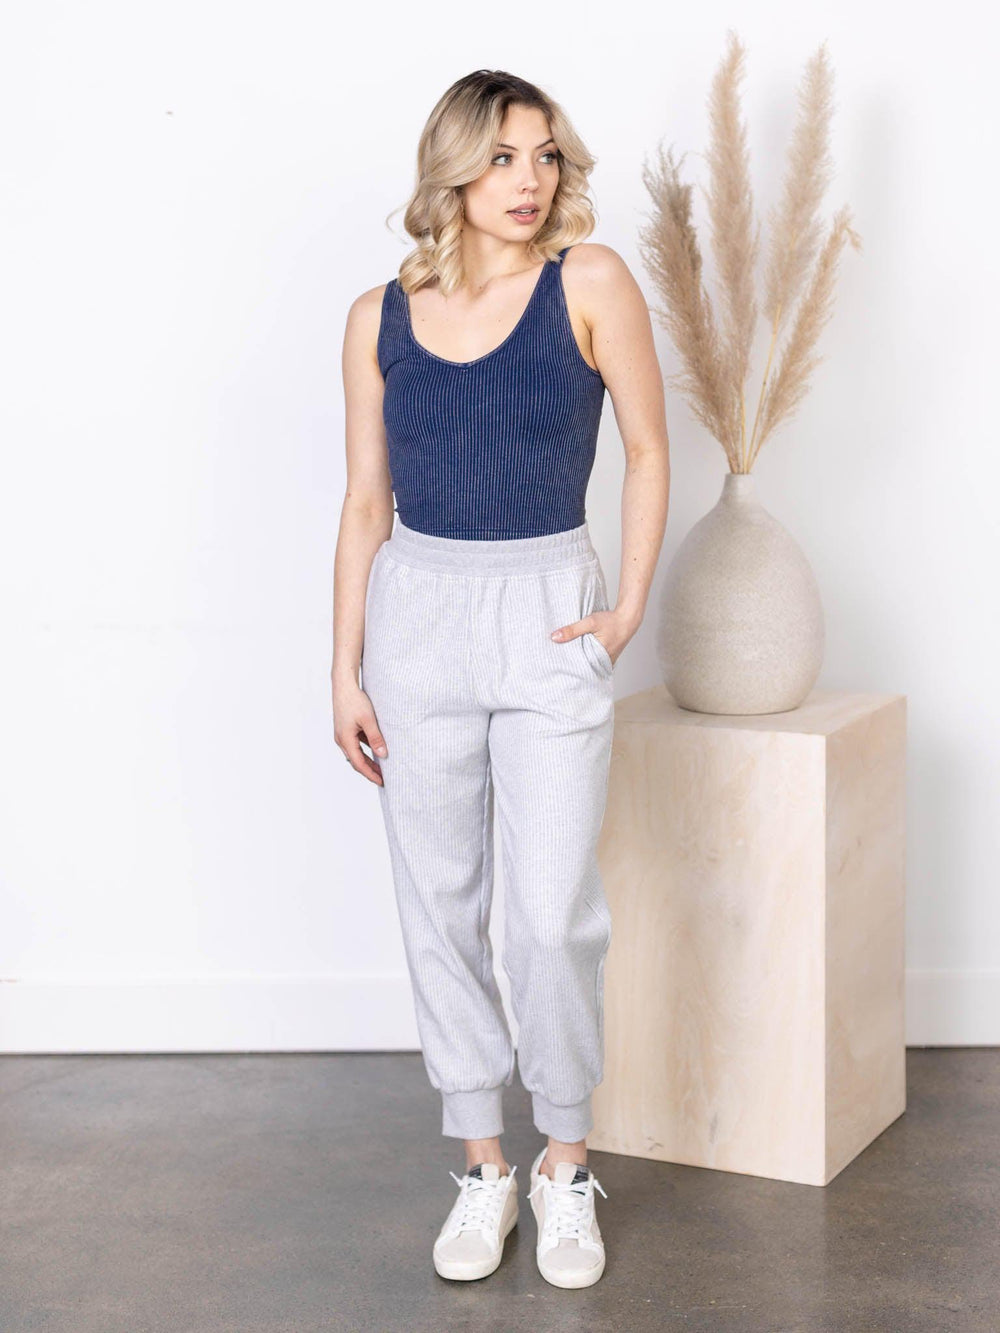 The Slim Cuff Pant 27.5 in Taupe Marl